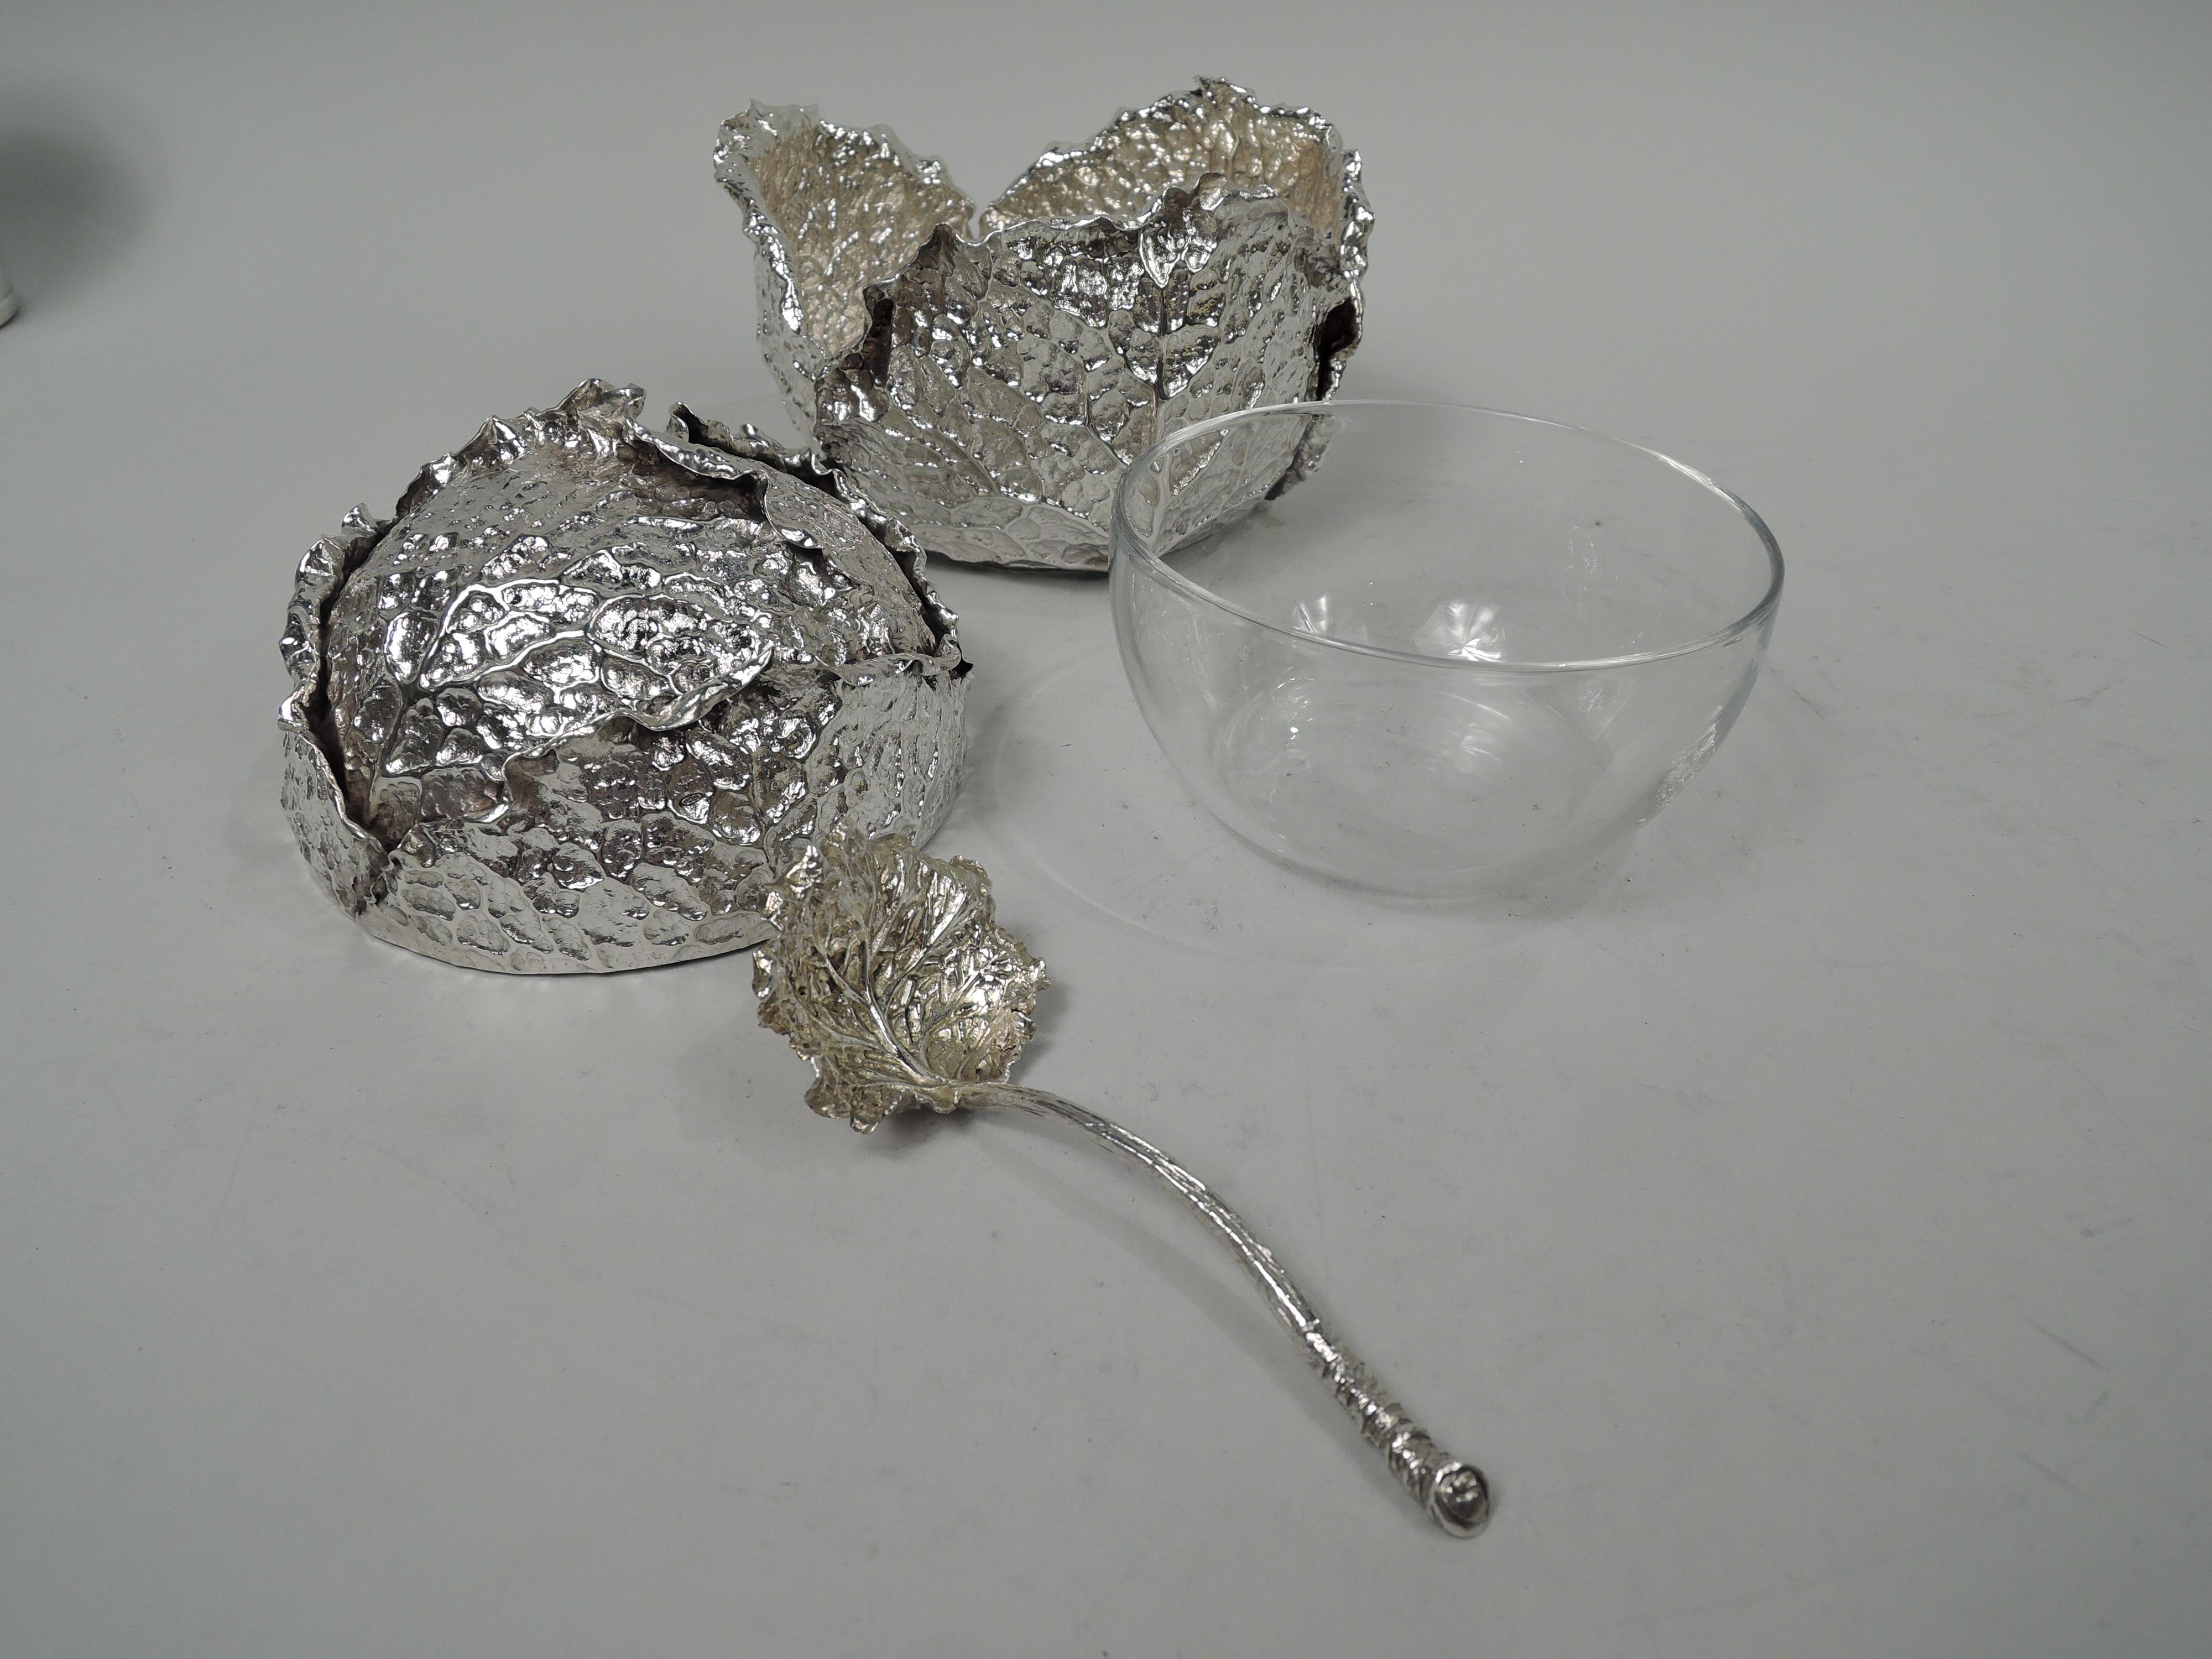 Stylish and jokey sterling silver cabbage head sauce bowl and ladle. Made by Buccellati in Italy. Domed cover set in bowl, both comprising overlapping leaves with realistic veins and irregularities. Ladle has branch handle and leaf bowl. Clear glass